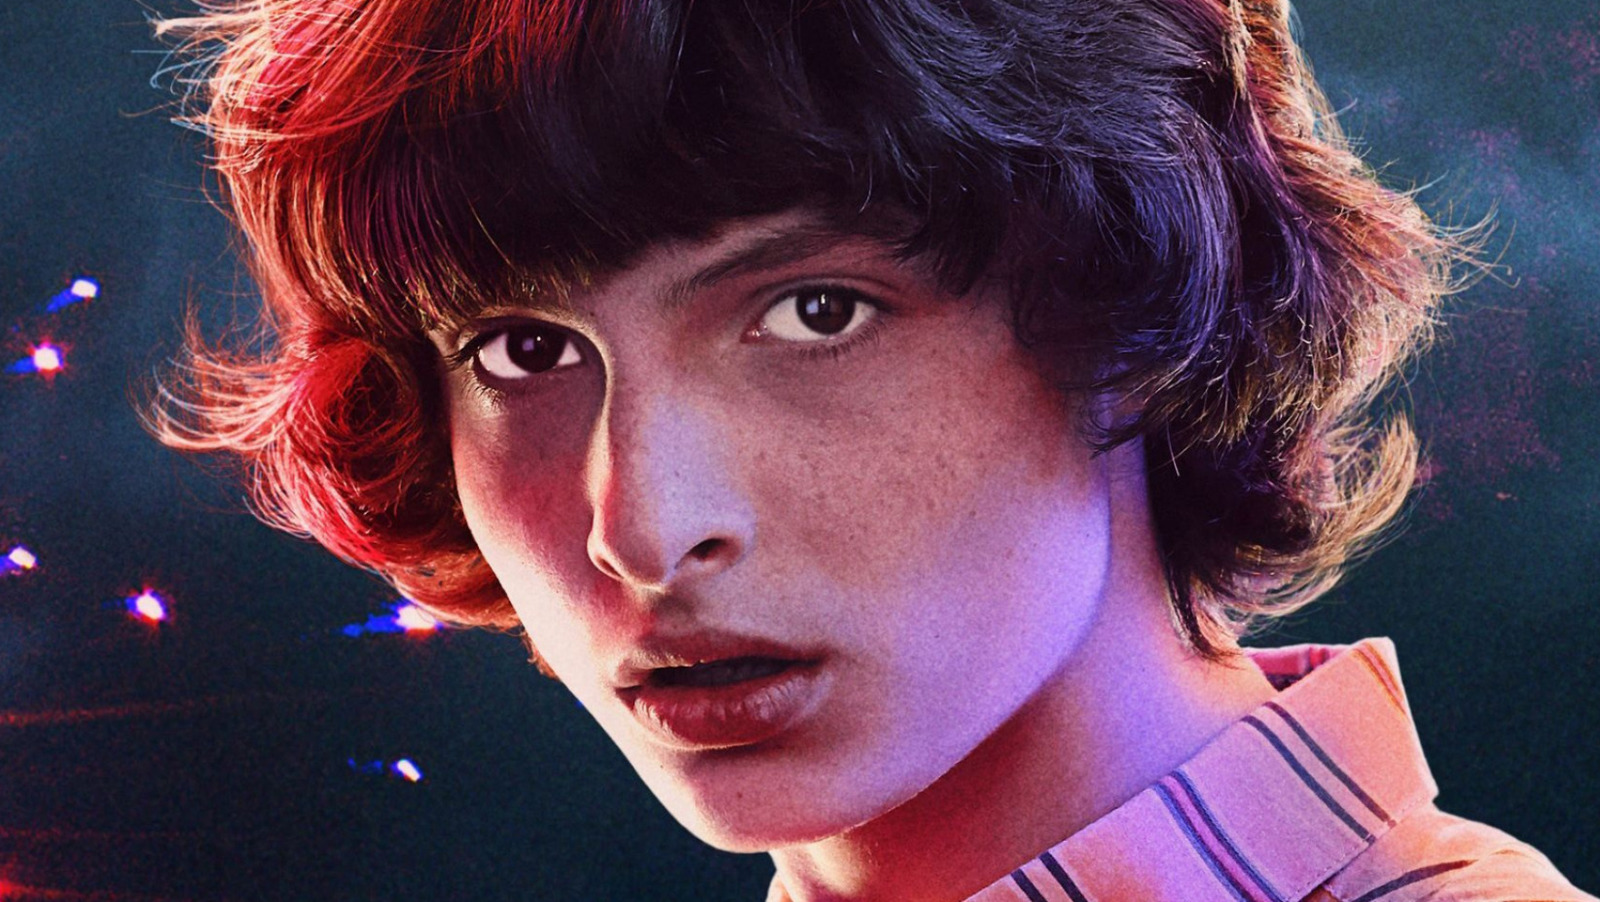 Finn Wolfhard Just Dropped An Intriguing Tease About Stranger Things Season 4